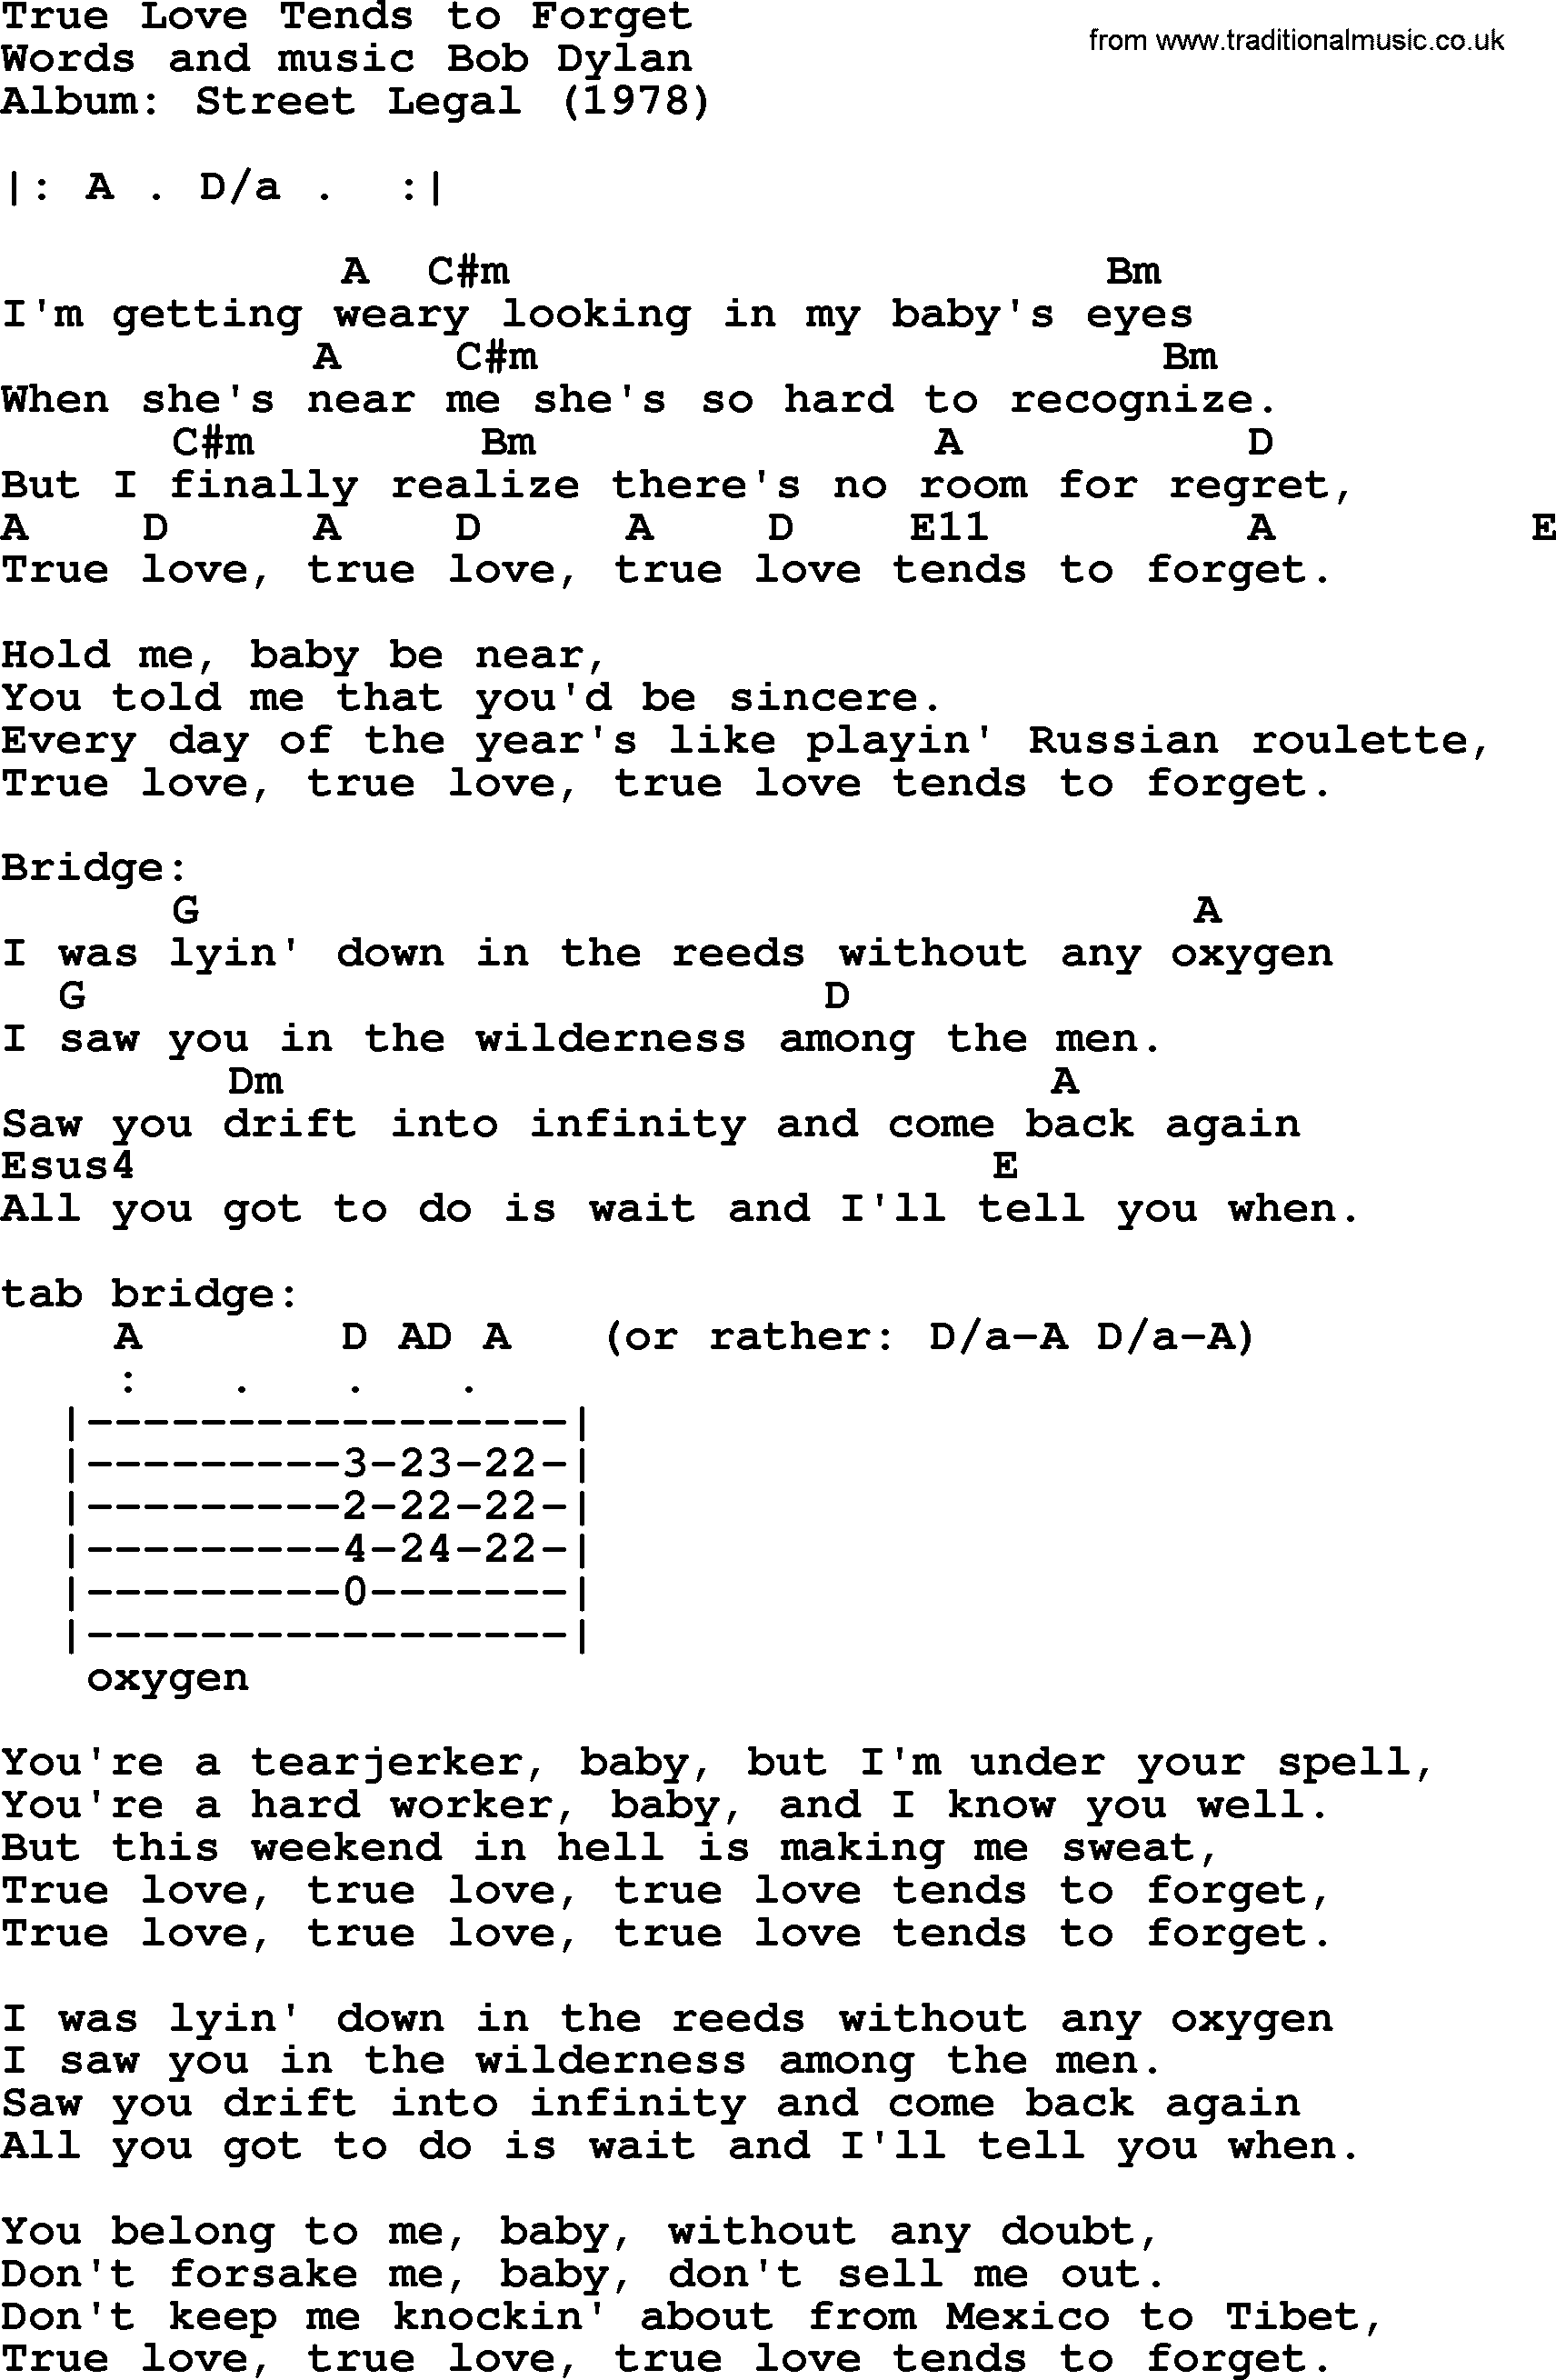 Bob Dylan song, lyrics with chords - True Love Tends to Forget